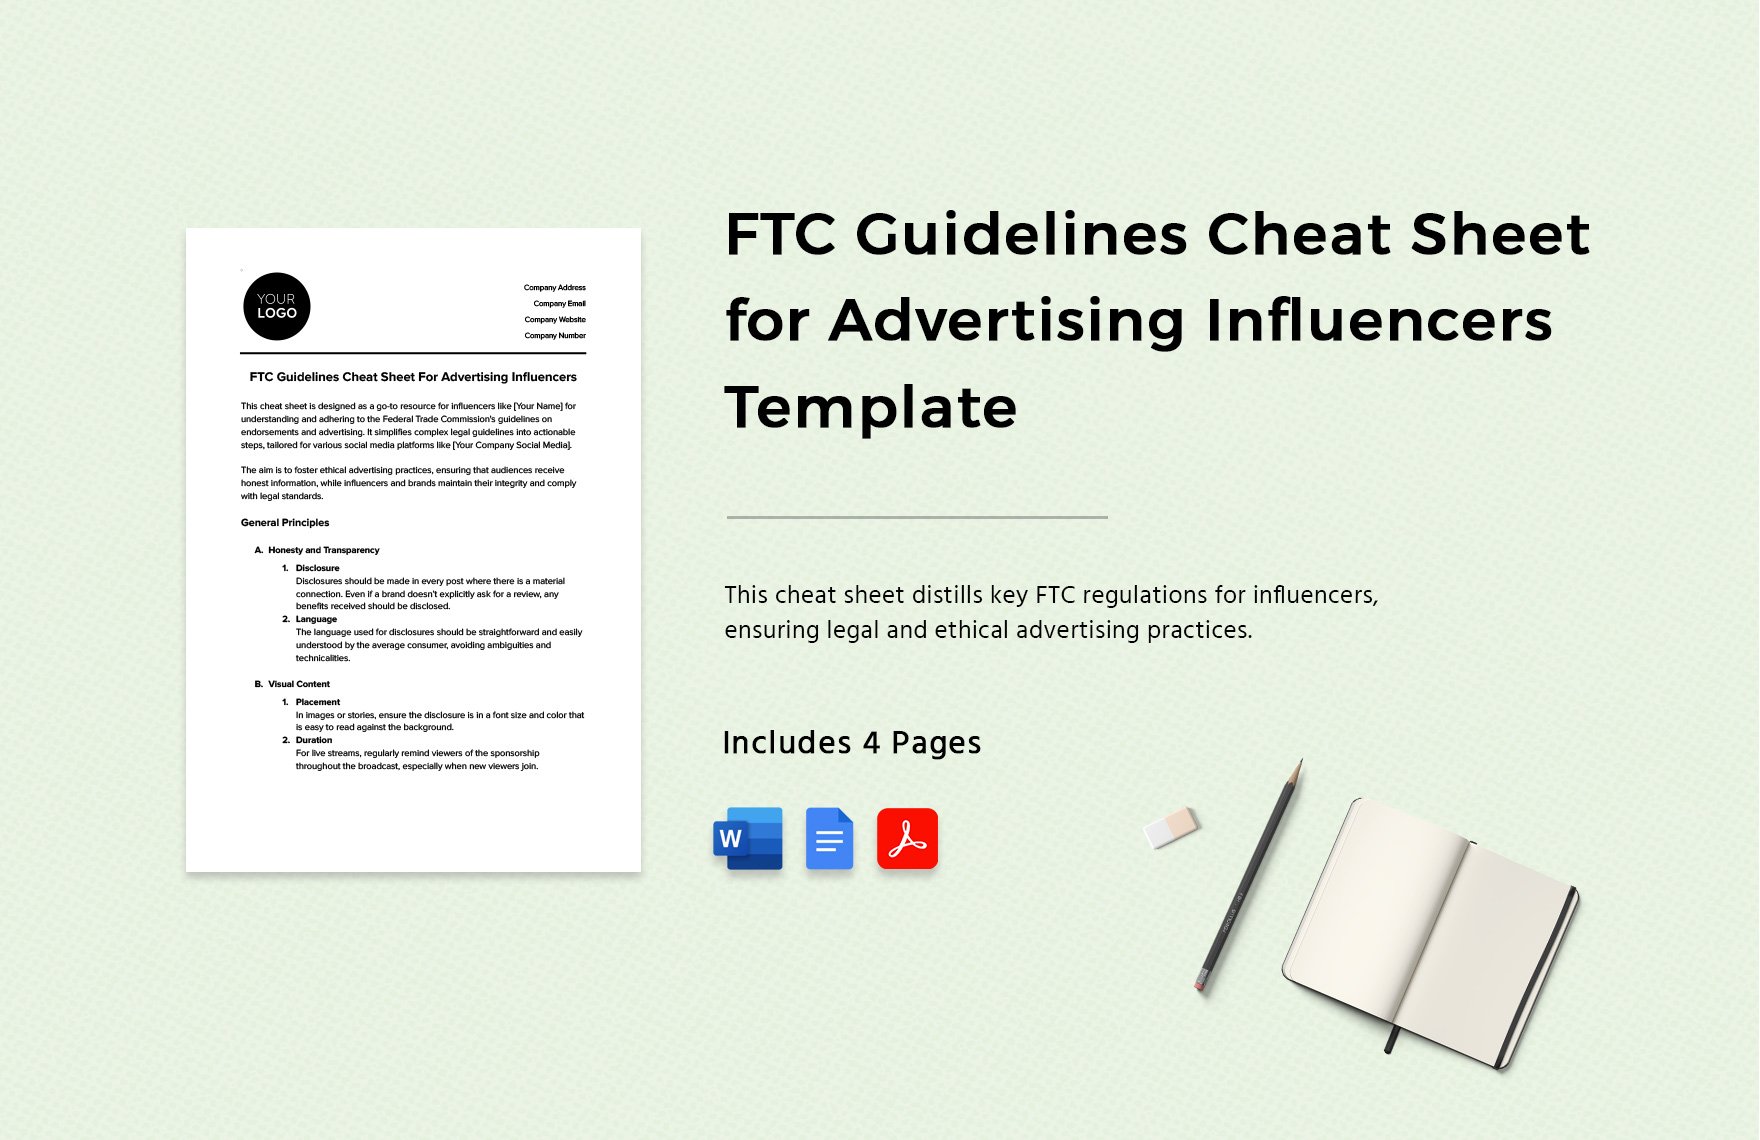 FTC Guidelines Cheat Sheet for Advertising Influencers Template